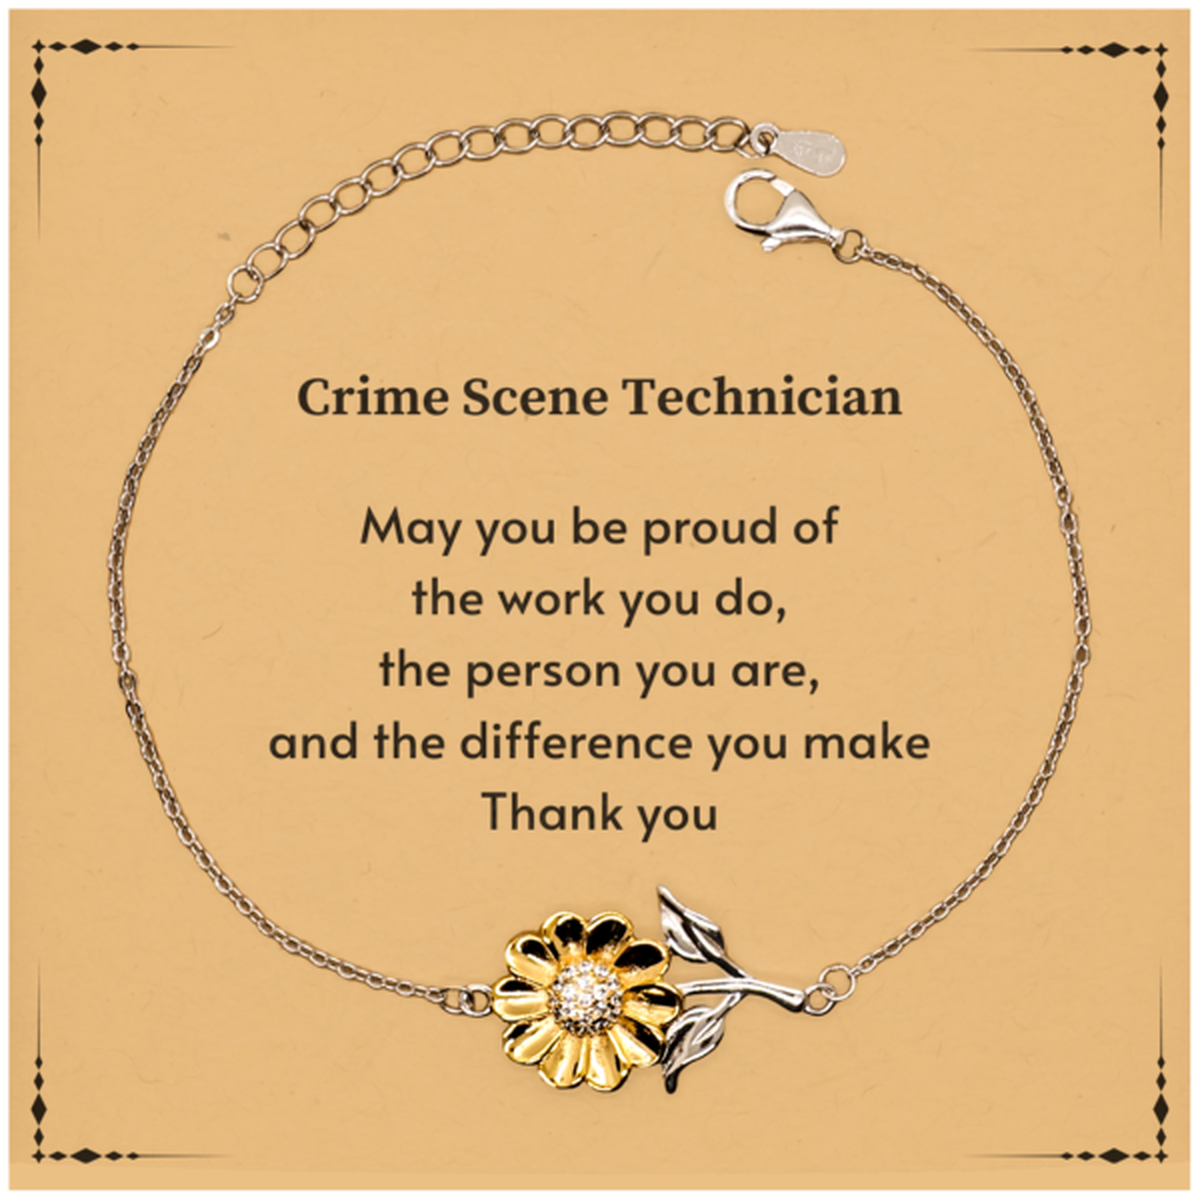 Heartwarming Sunflower Bracelet Retirement Coworkers Gifts for Crime Scene Technician, Crime Scene Technician May You be proud of the work you do, the person you are Gifts for Boss Men Women Friends